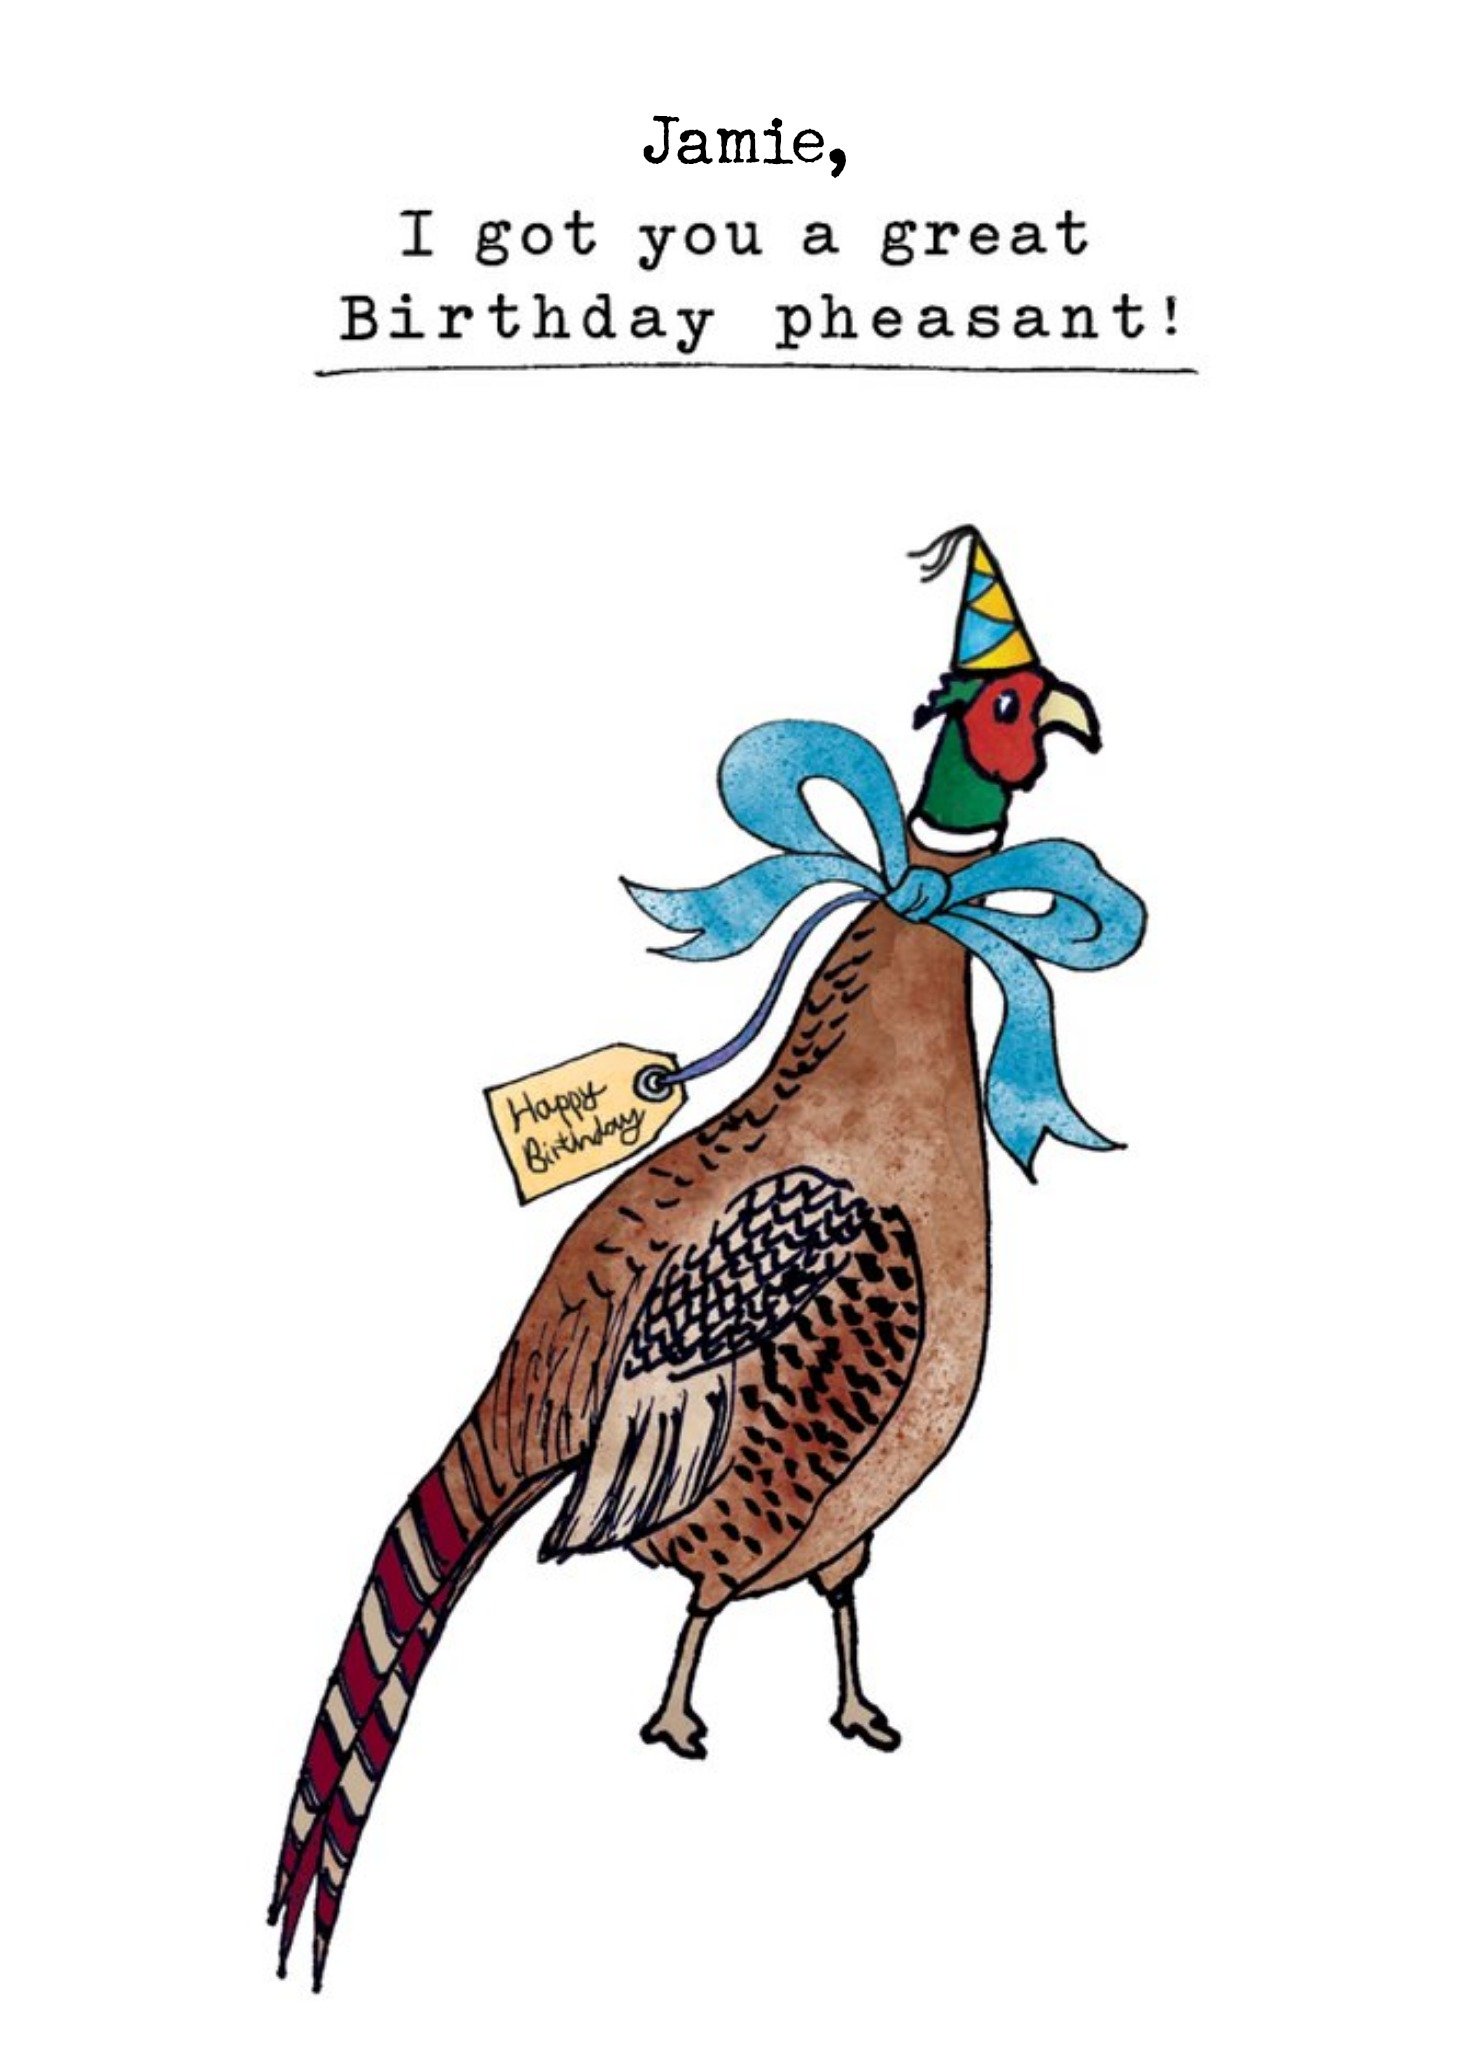 Other London Studio Puntastic Got You A Present Pheasant Birthday Card, Large